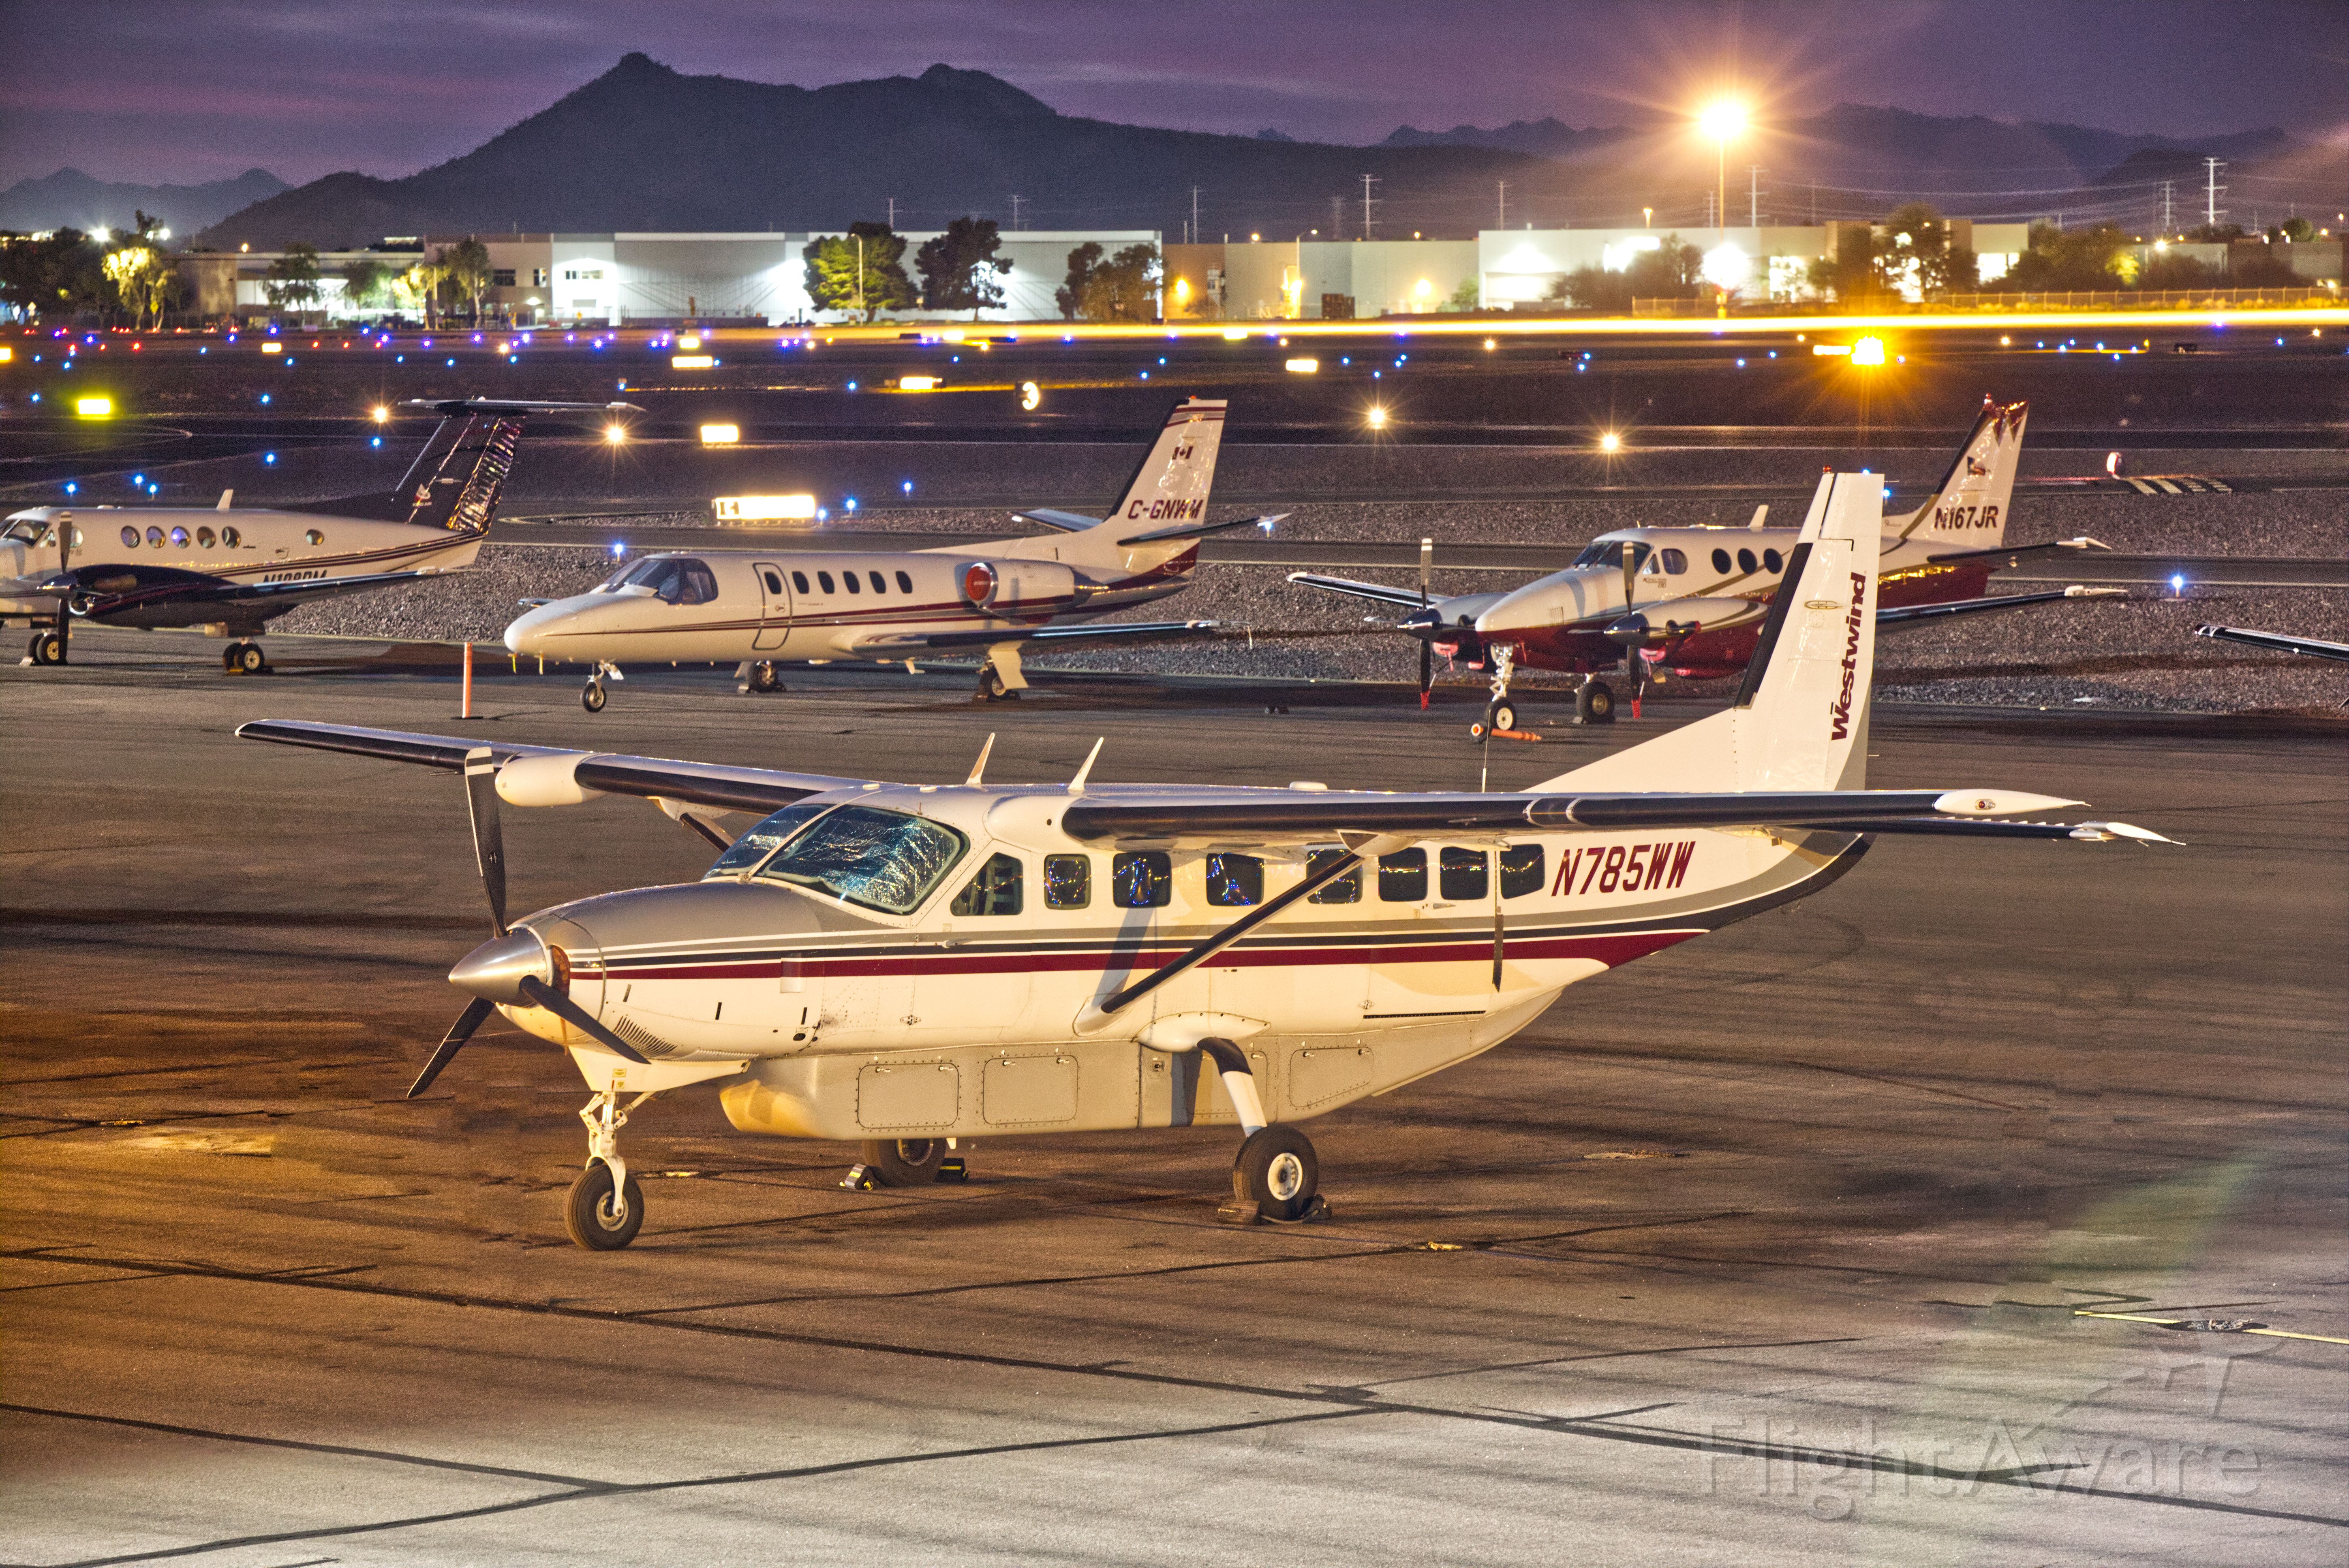 Cessna Caravan (N785WW) - Spotted at DVT on Wednesday, February 5, 2020 at approx 19:00 local